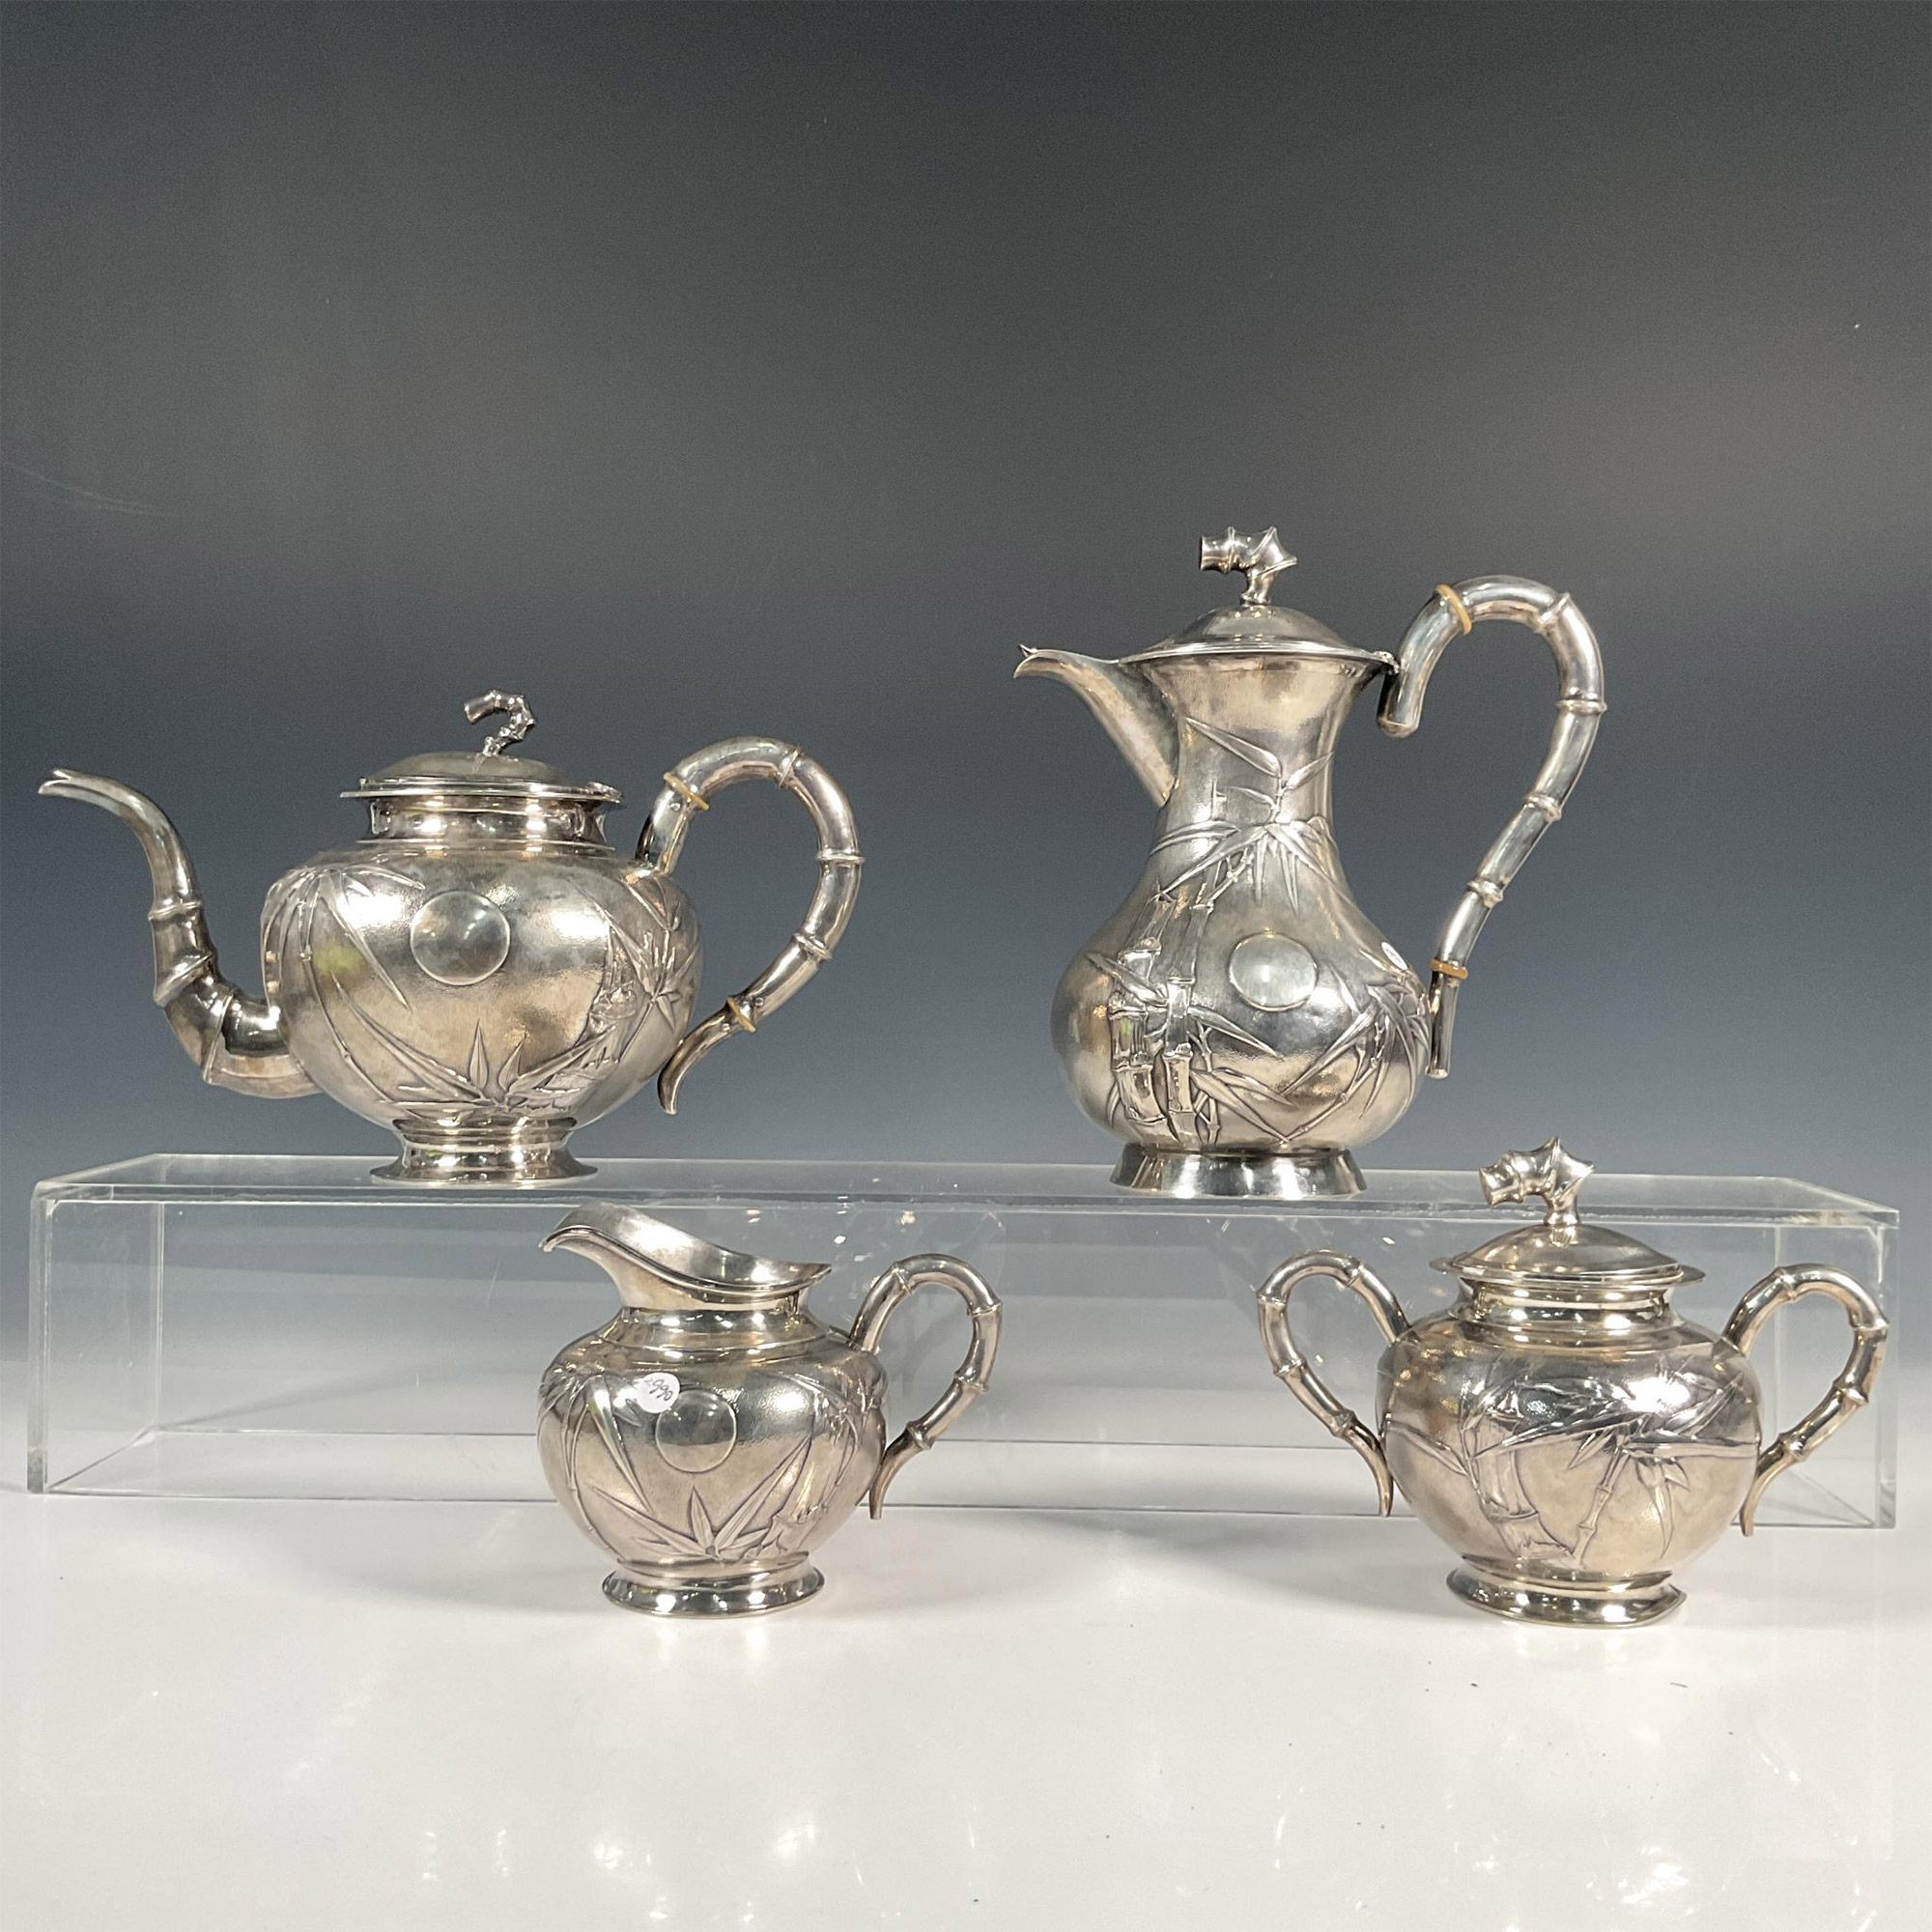 4pc Chinese Export Silver Tea and Coffee Service Set - Image 2 of 8